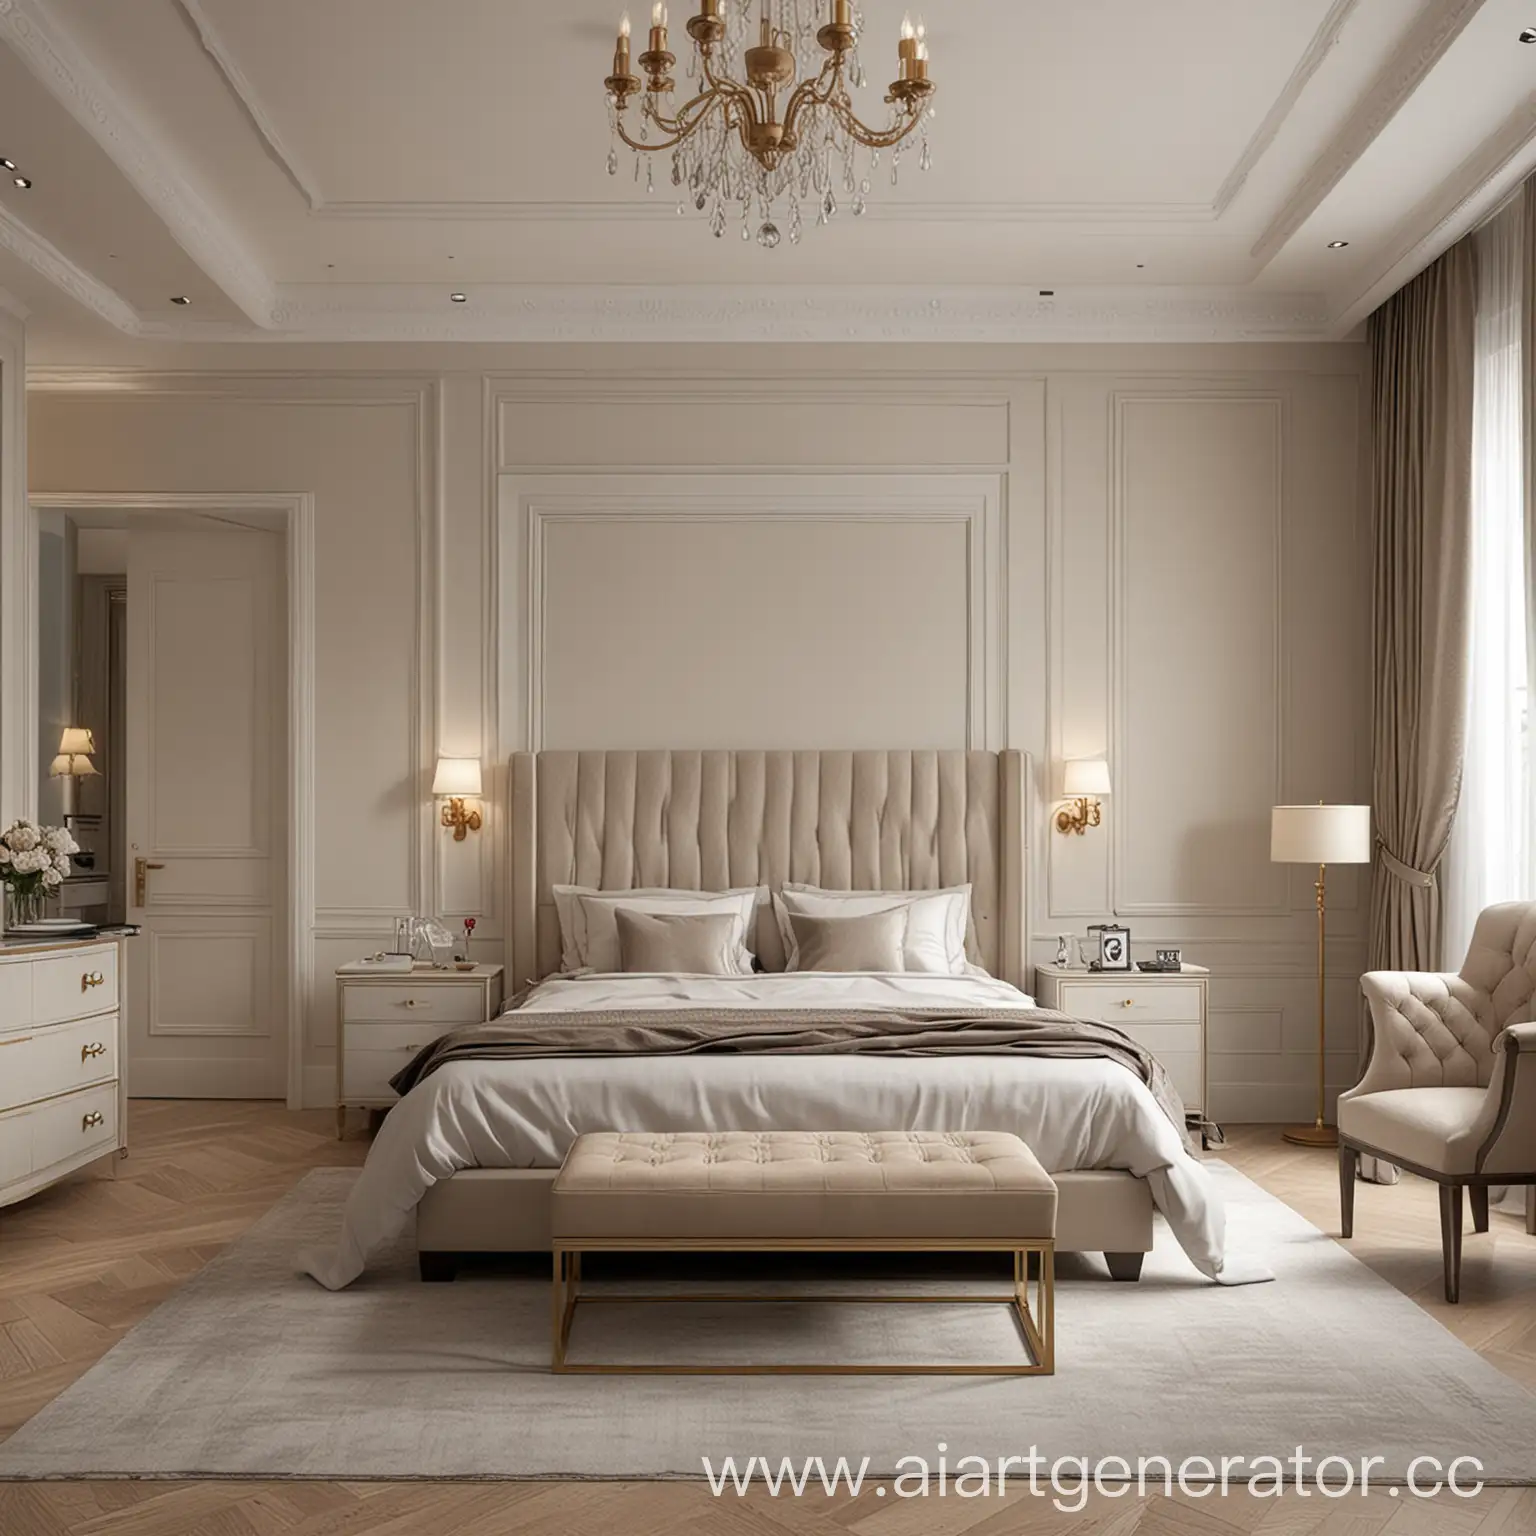 Modern-Classical-Bedroom-Furniture-Design-for-Apartments